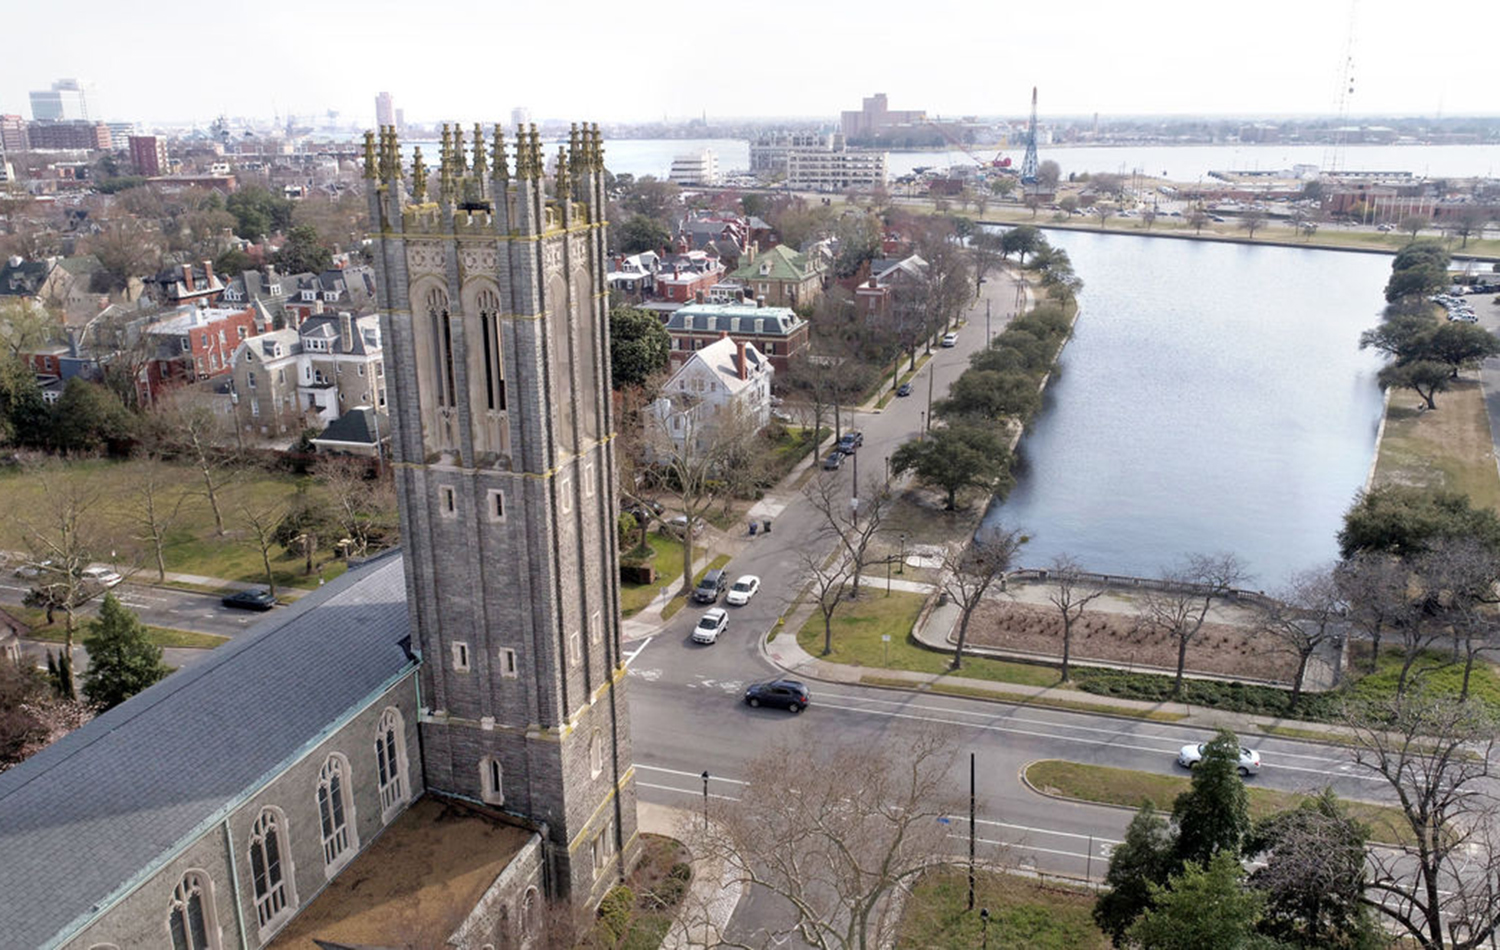  Christ &amp; St. Luke's Episcopal Church in Norfolk stands just across the street from the flood-prone Hague. 